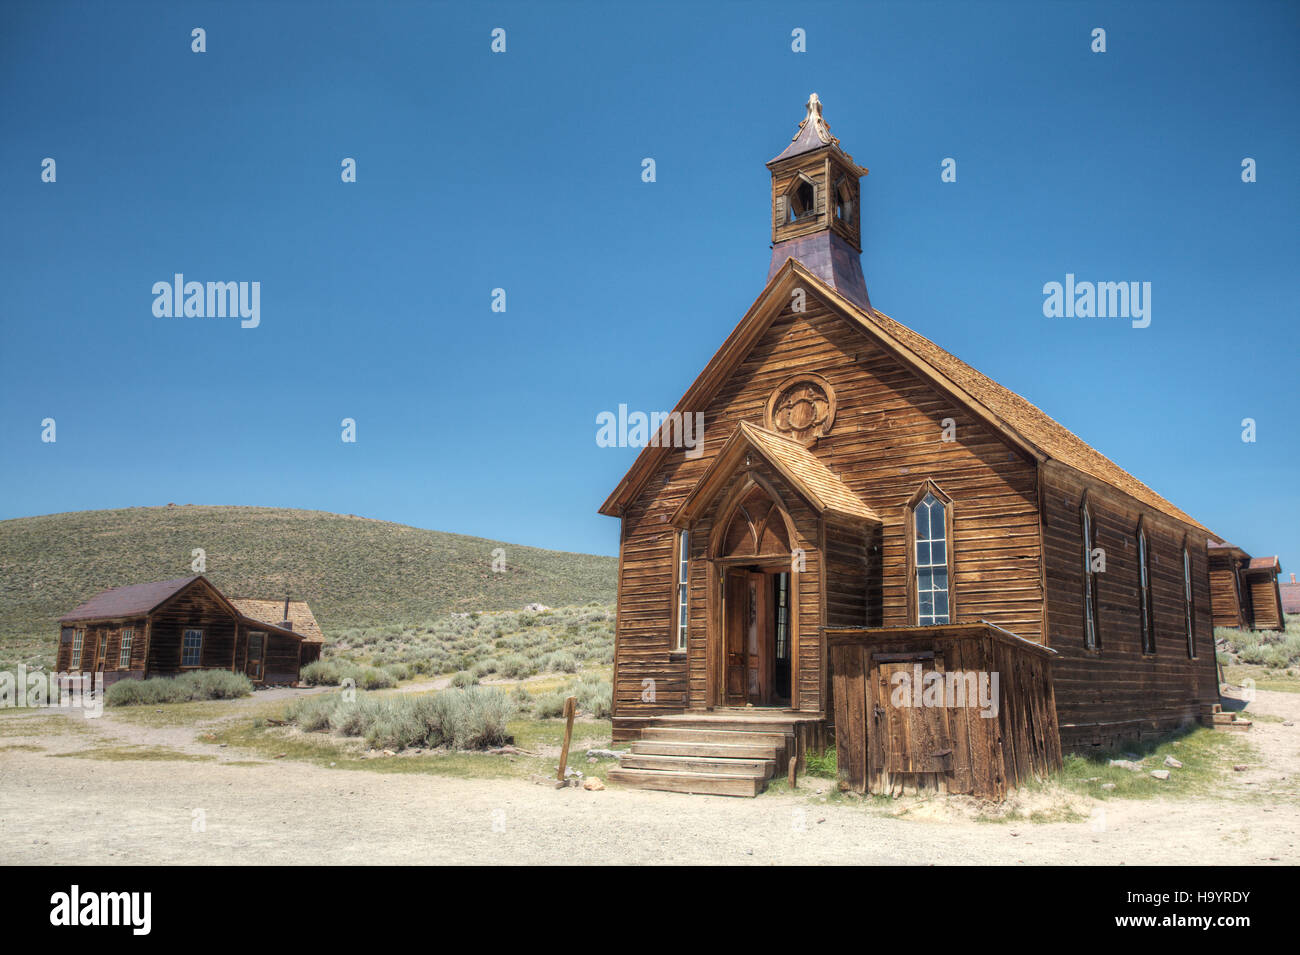 The Chapel in Bodie, a ghost town visitor attraction in California.  Bodie is maintained in a state of arrested repair, maintained in a stable state t Stock Photo